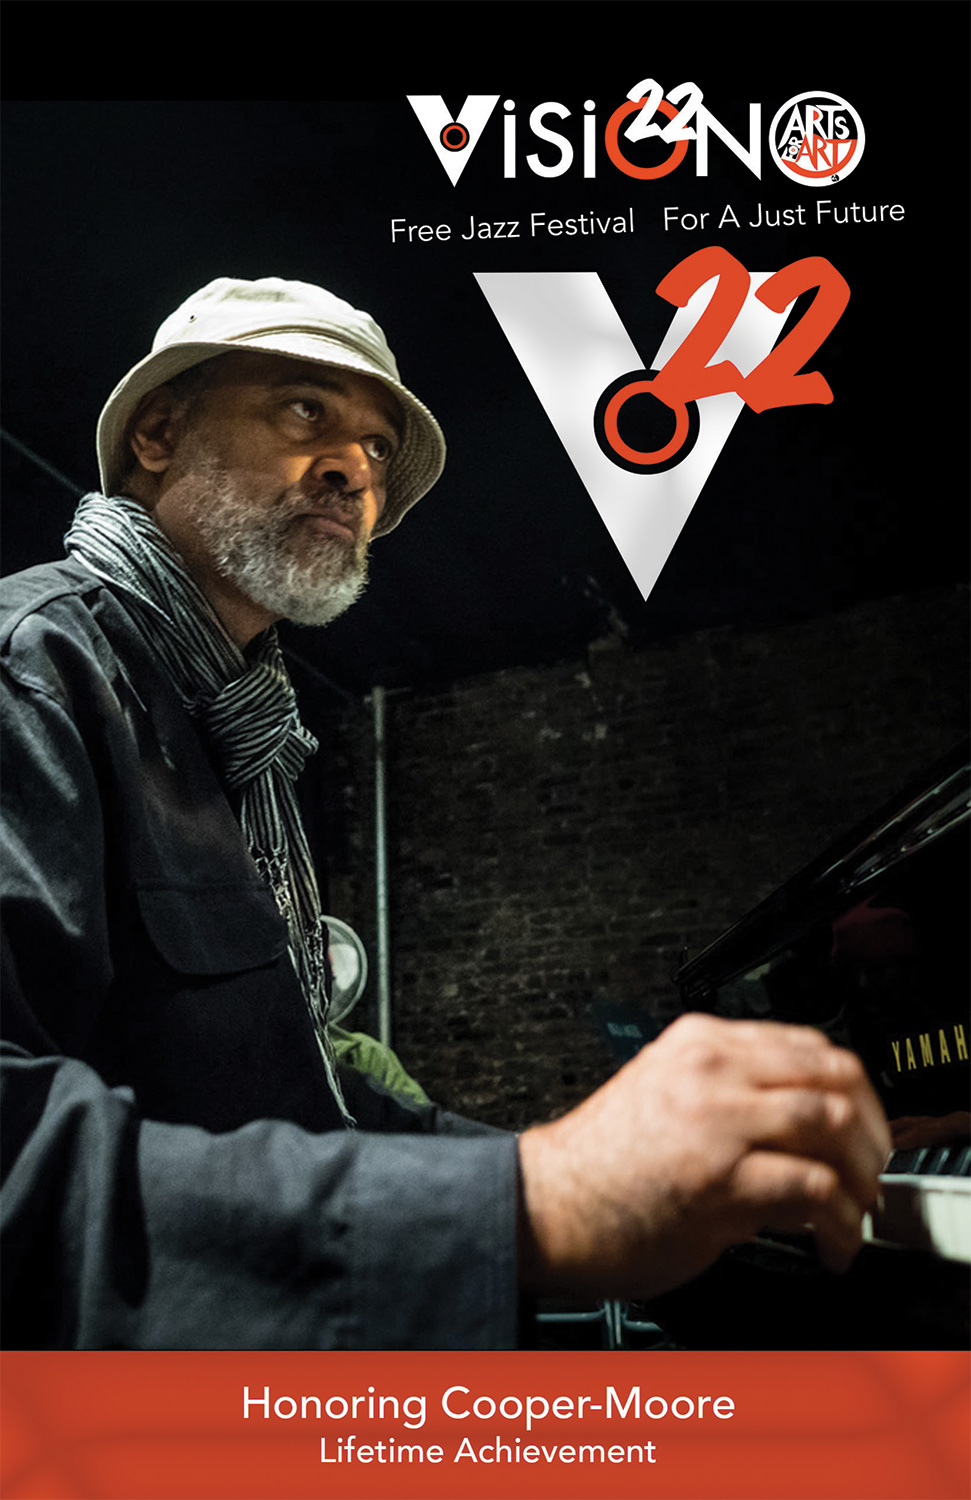 full color cover for the 22 Vision Festival brochure featuring a picture of pianist Cooper-Moore and the V22 logo